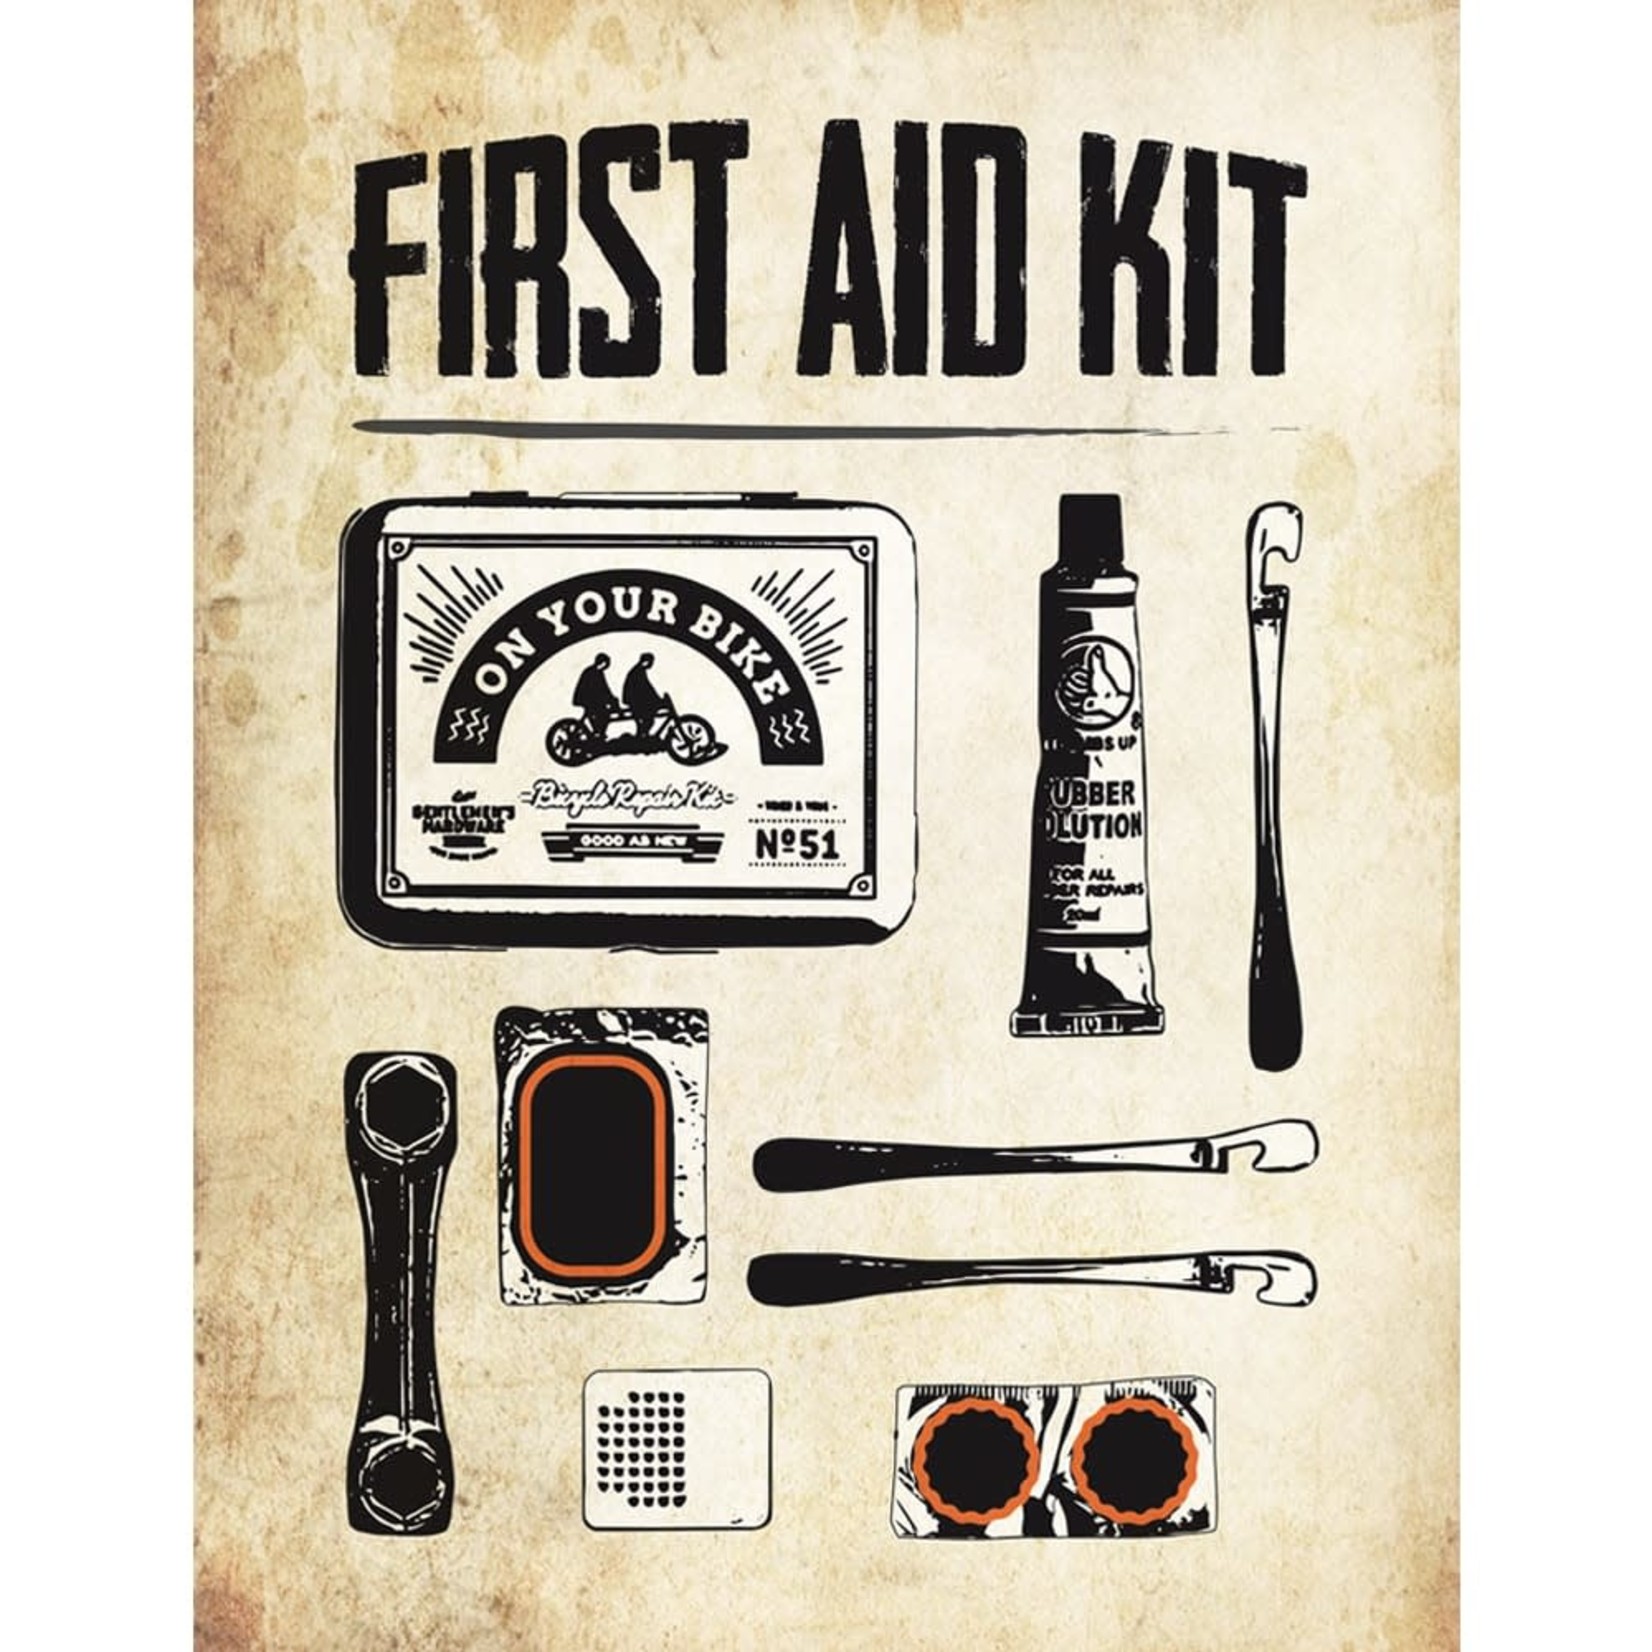 The Vandal First Aid Kit Post Card